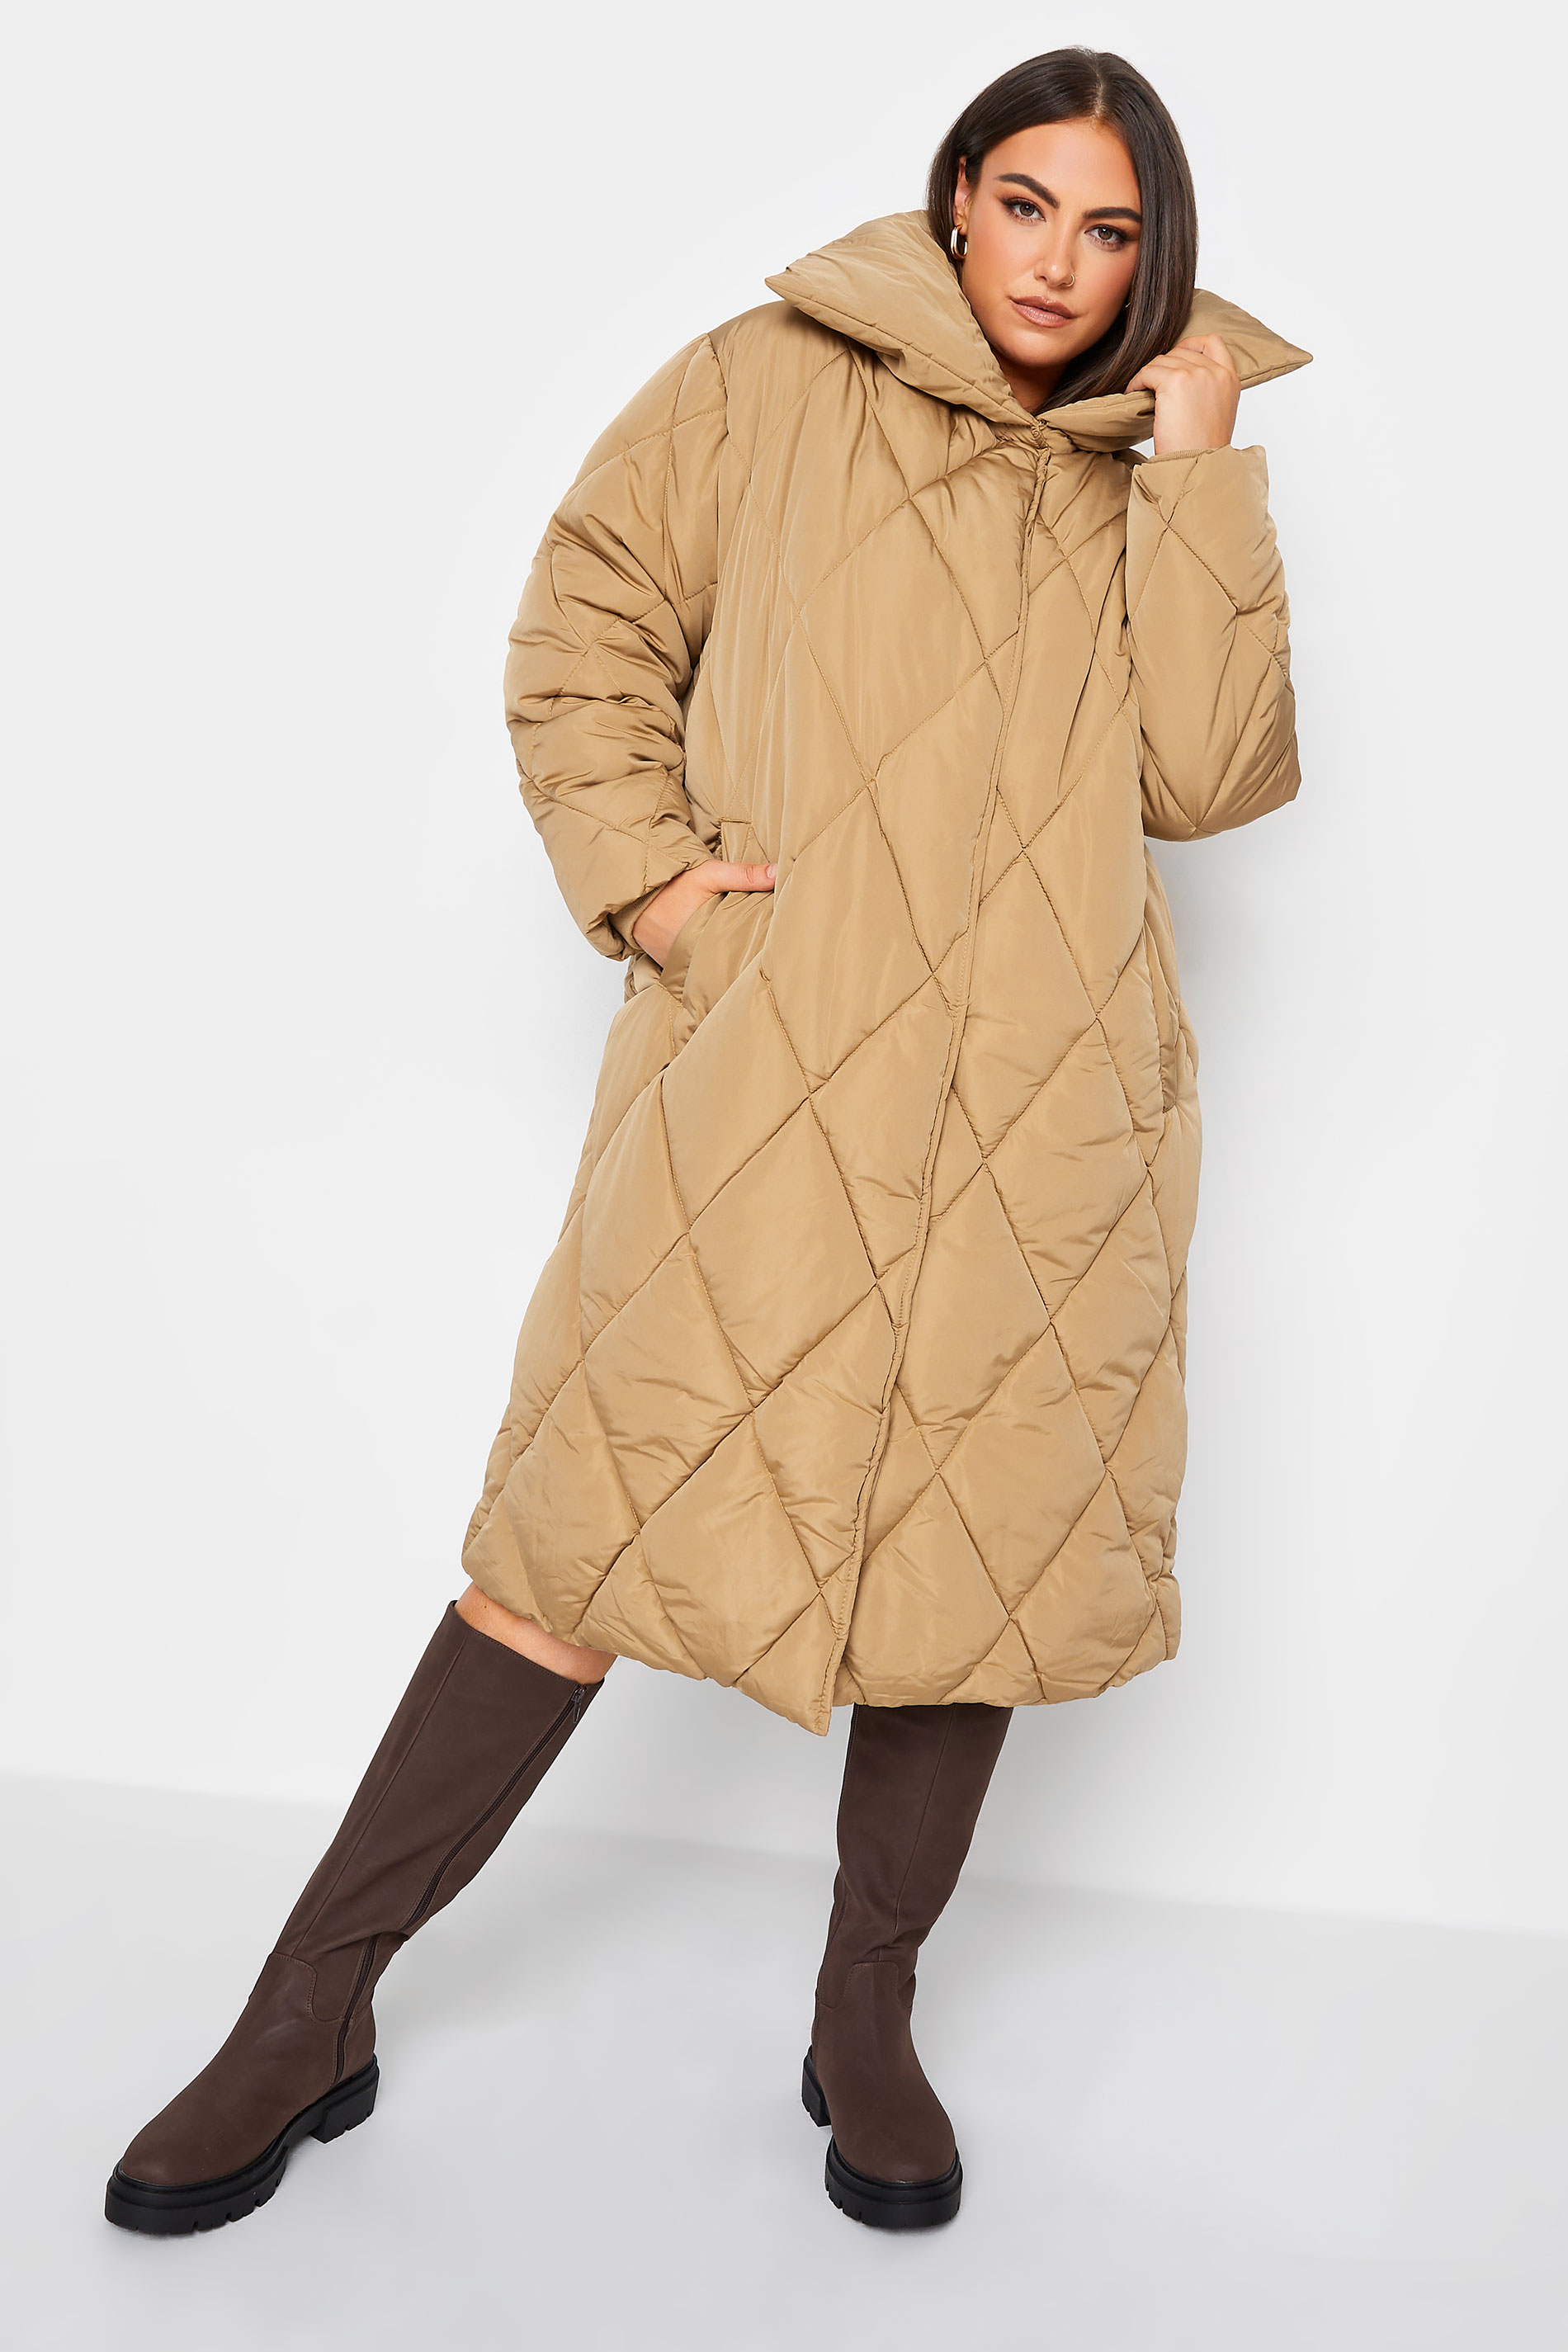 Yours Curve Beige Brown Quilted Puffer Coat, Women's Curve & Plus Size, Yours product